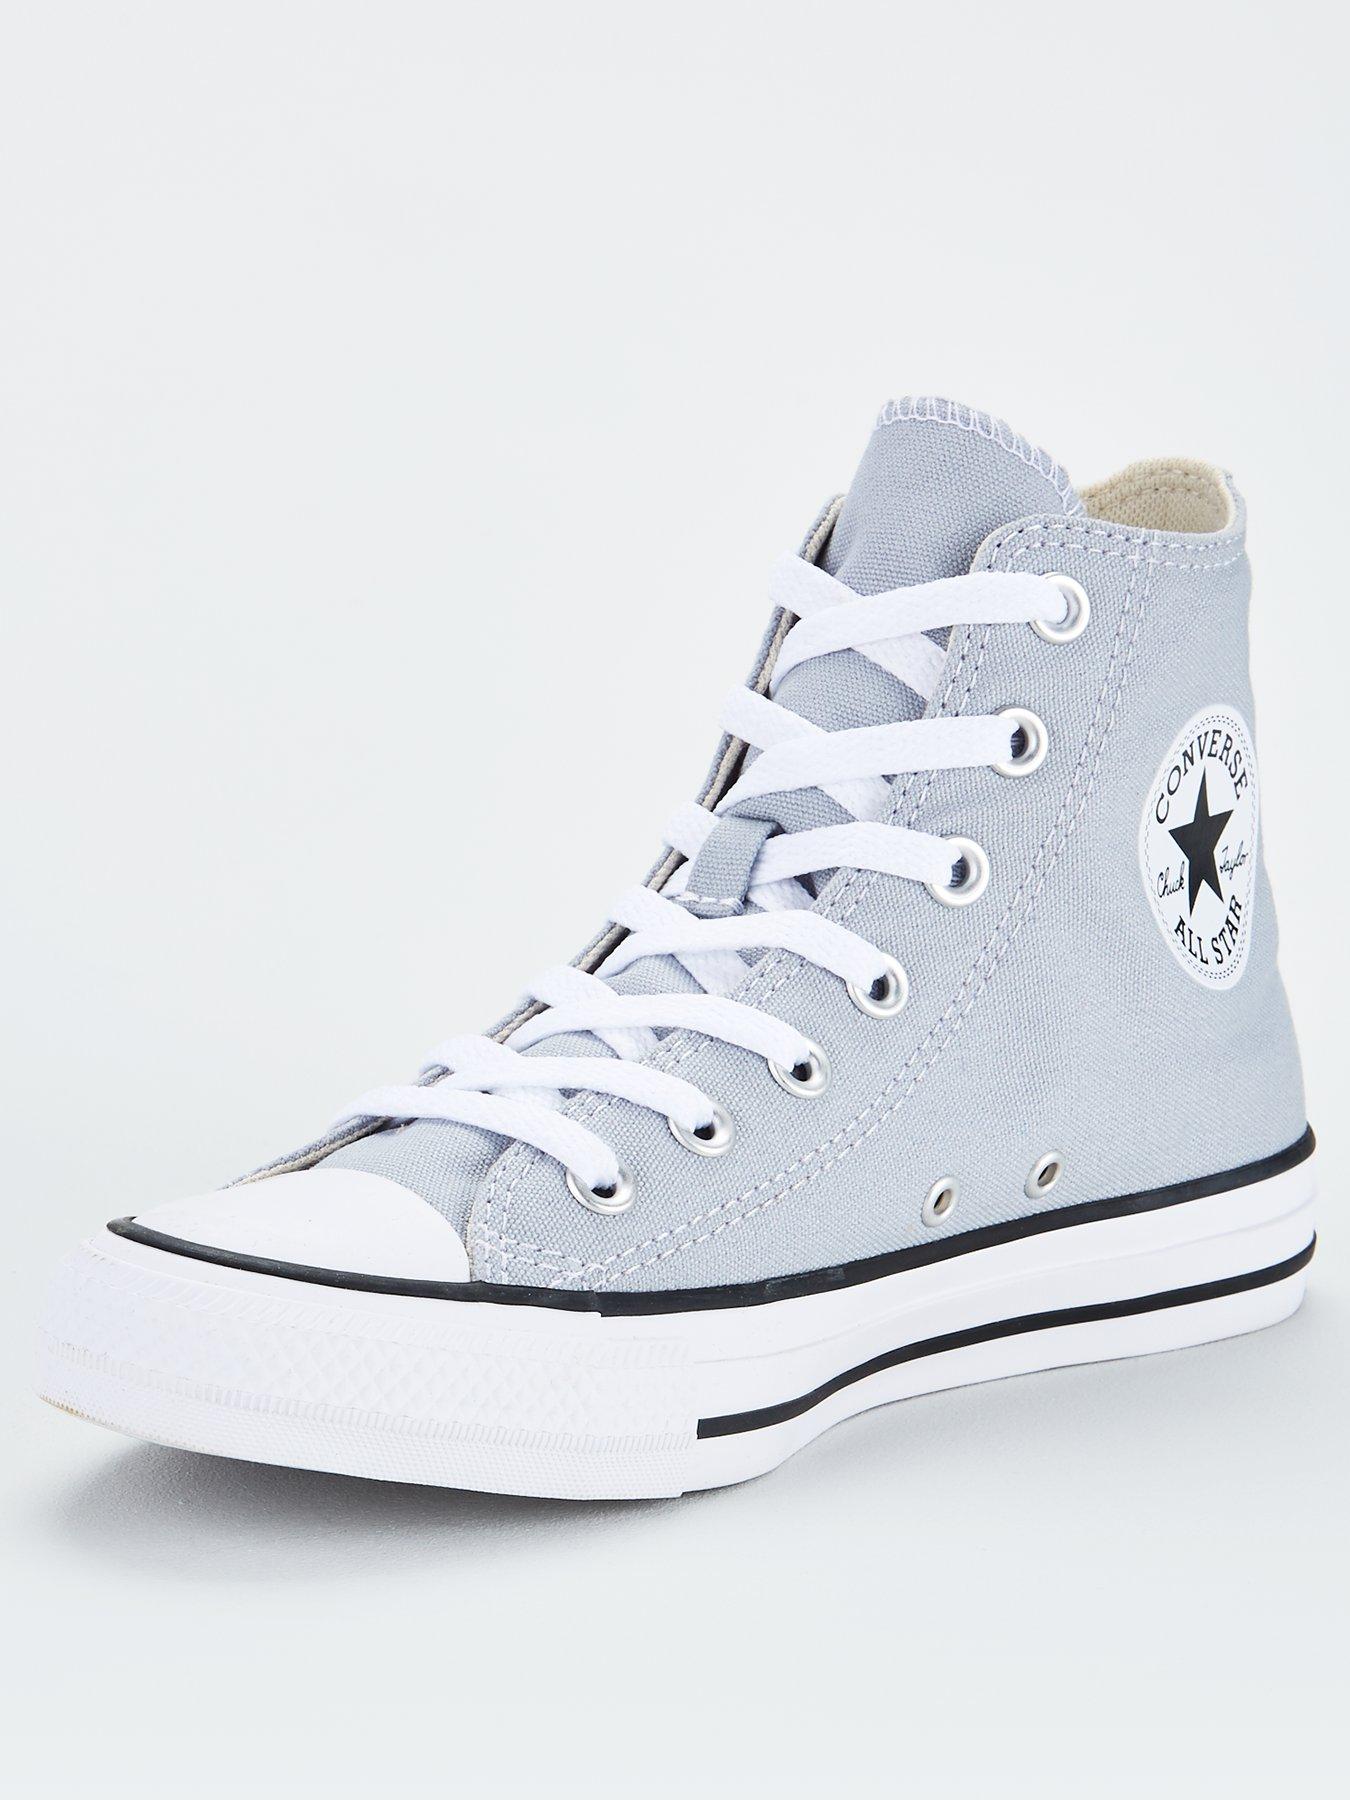 size 3 converse high tops